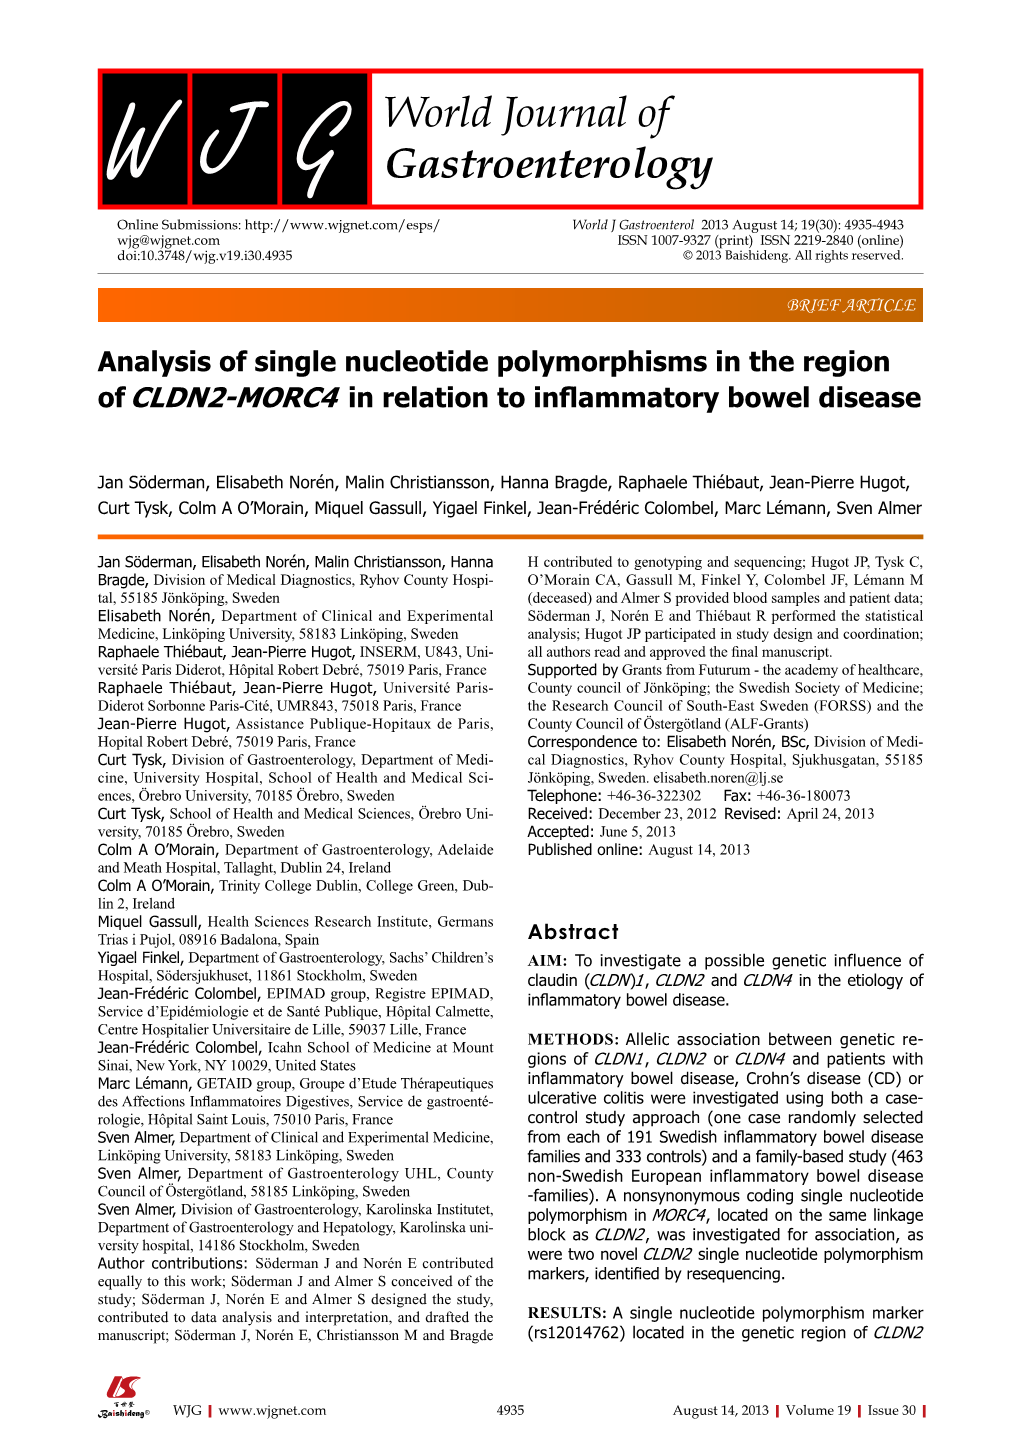 Analysis of Single Nucleotide Polymorphisms in the Region of CLDN2-MORC4 in Relation to Inflammatory Bowel Disease